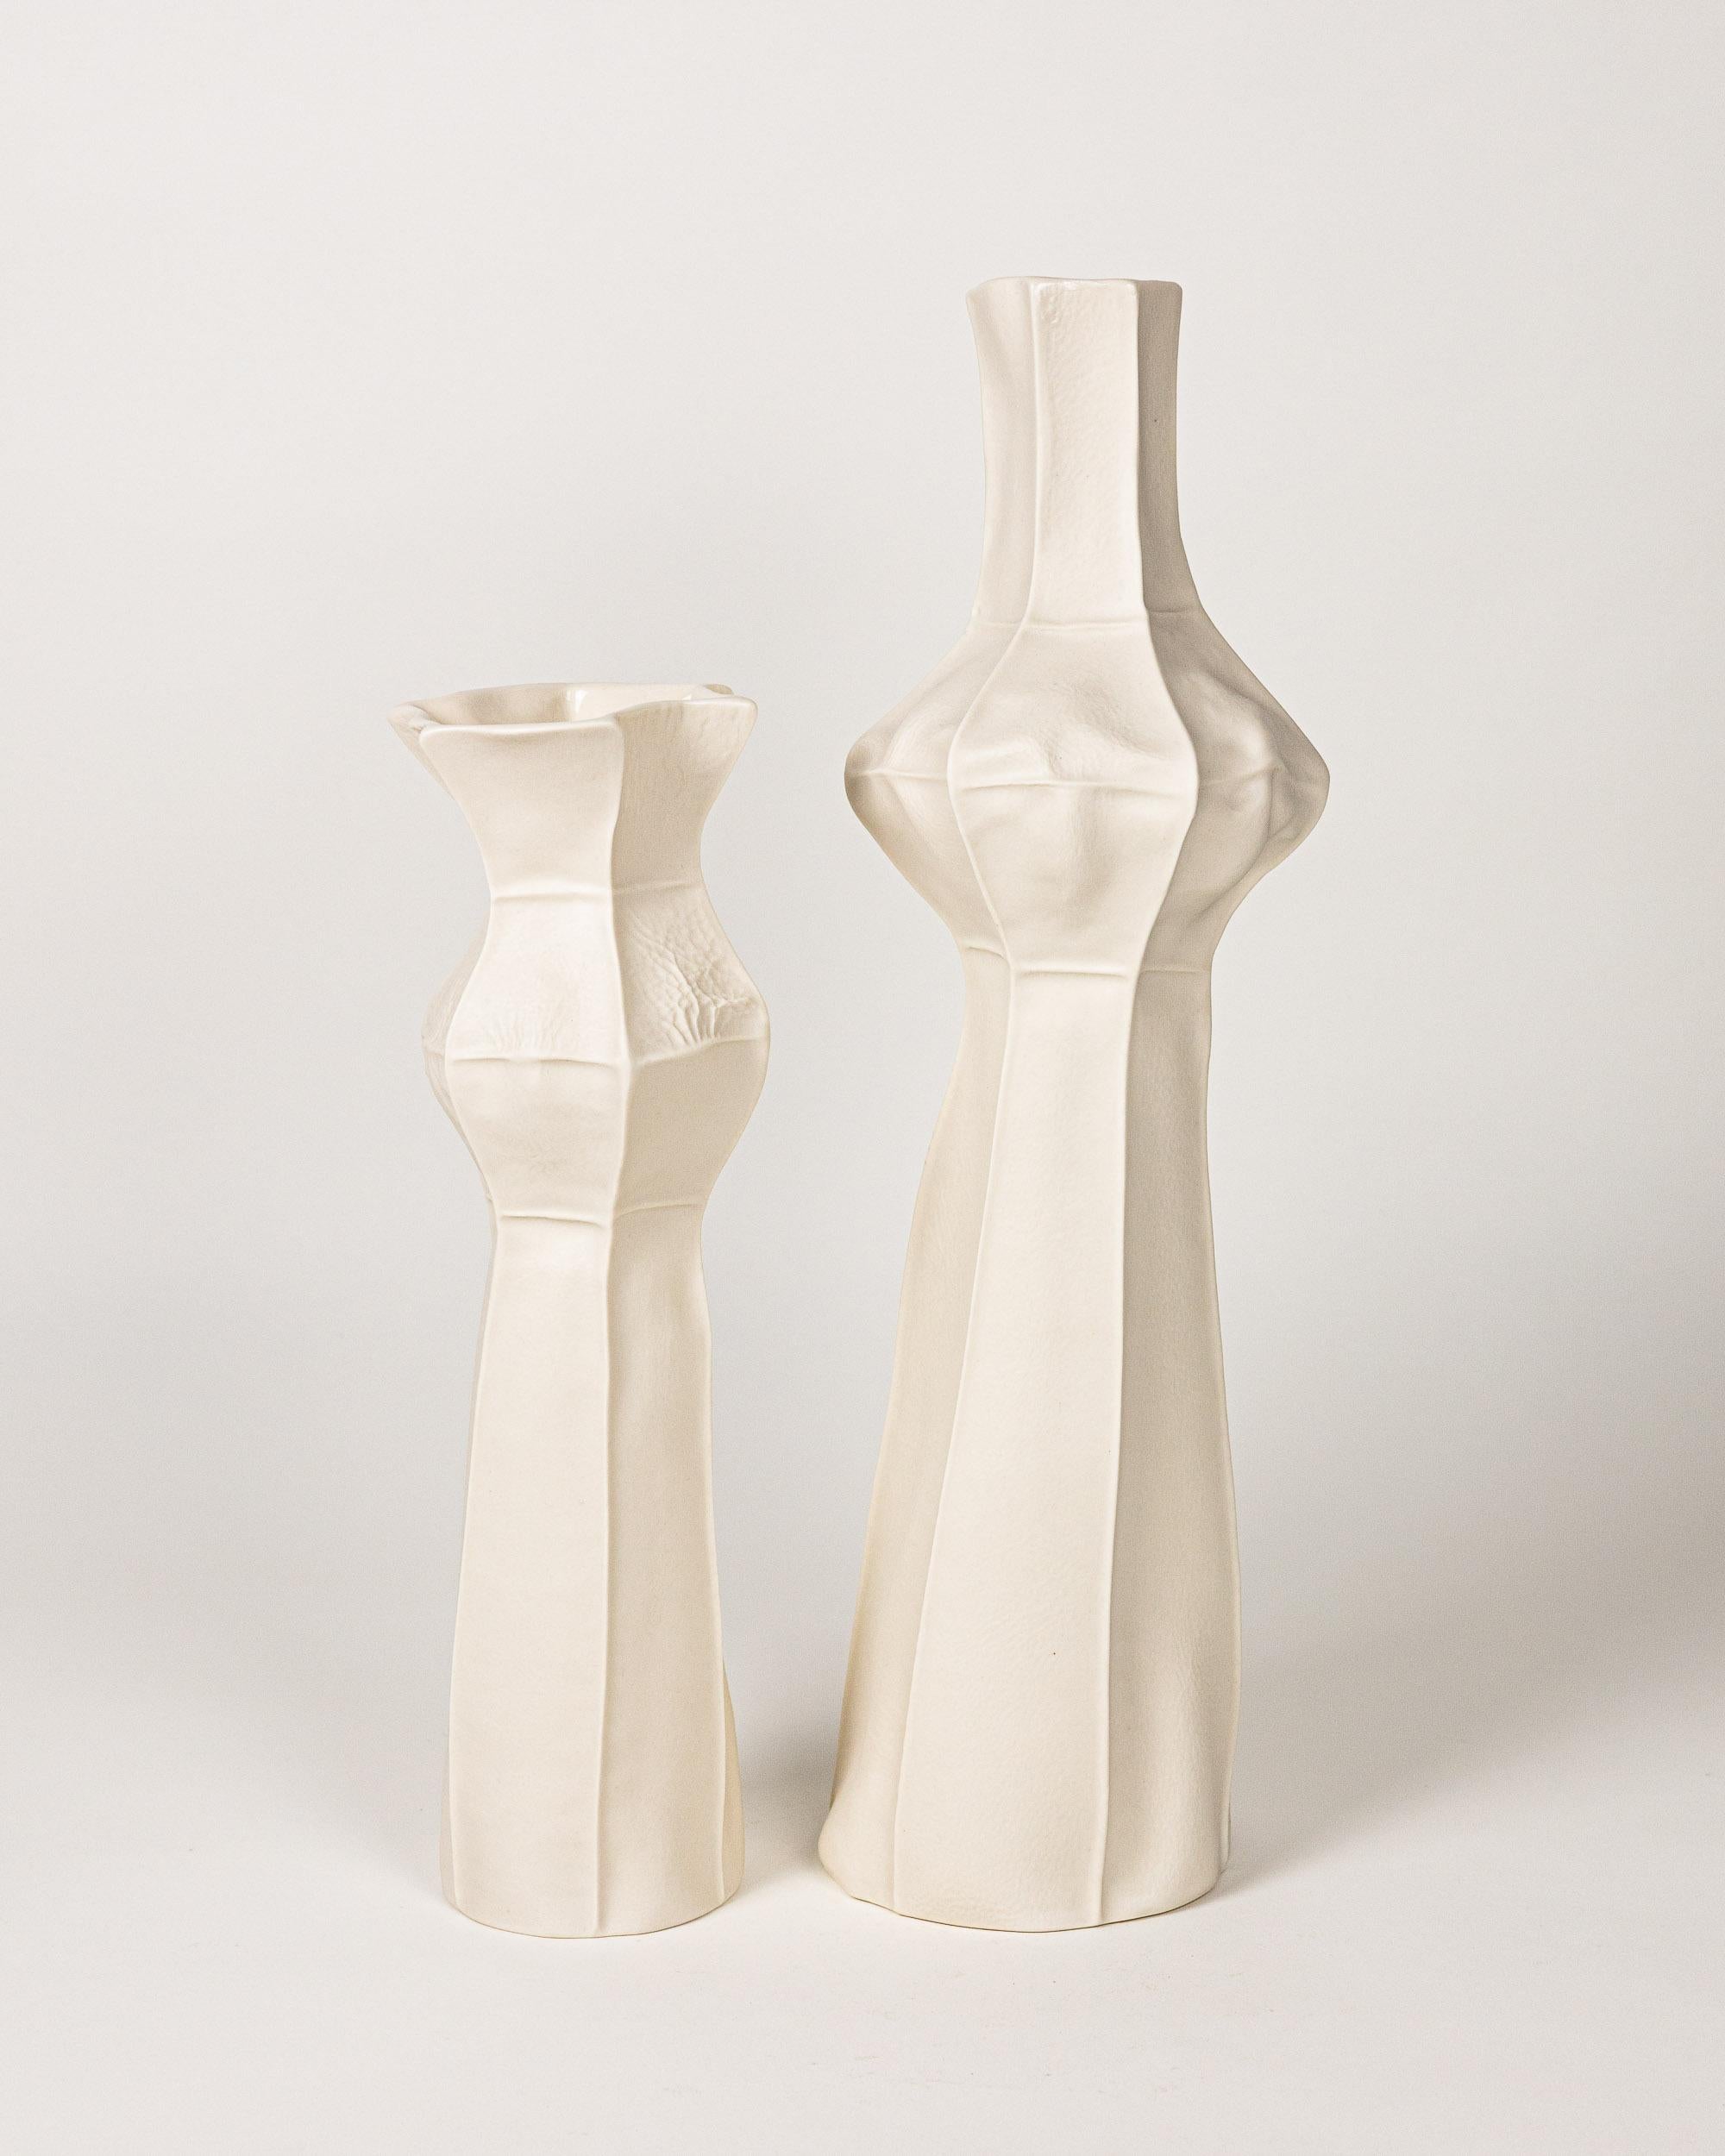 A pair of tall and tactile porcelain vases with a leather textured exterior surface and clear glazed interior. This specific set was inspired by skyscrapers in the city. 

As a result of the production process each item is one-of-a-kind. Set